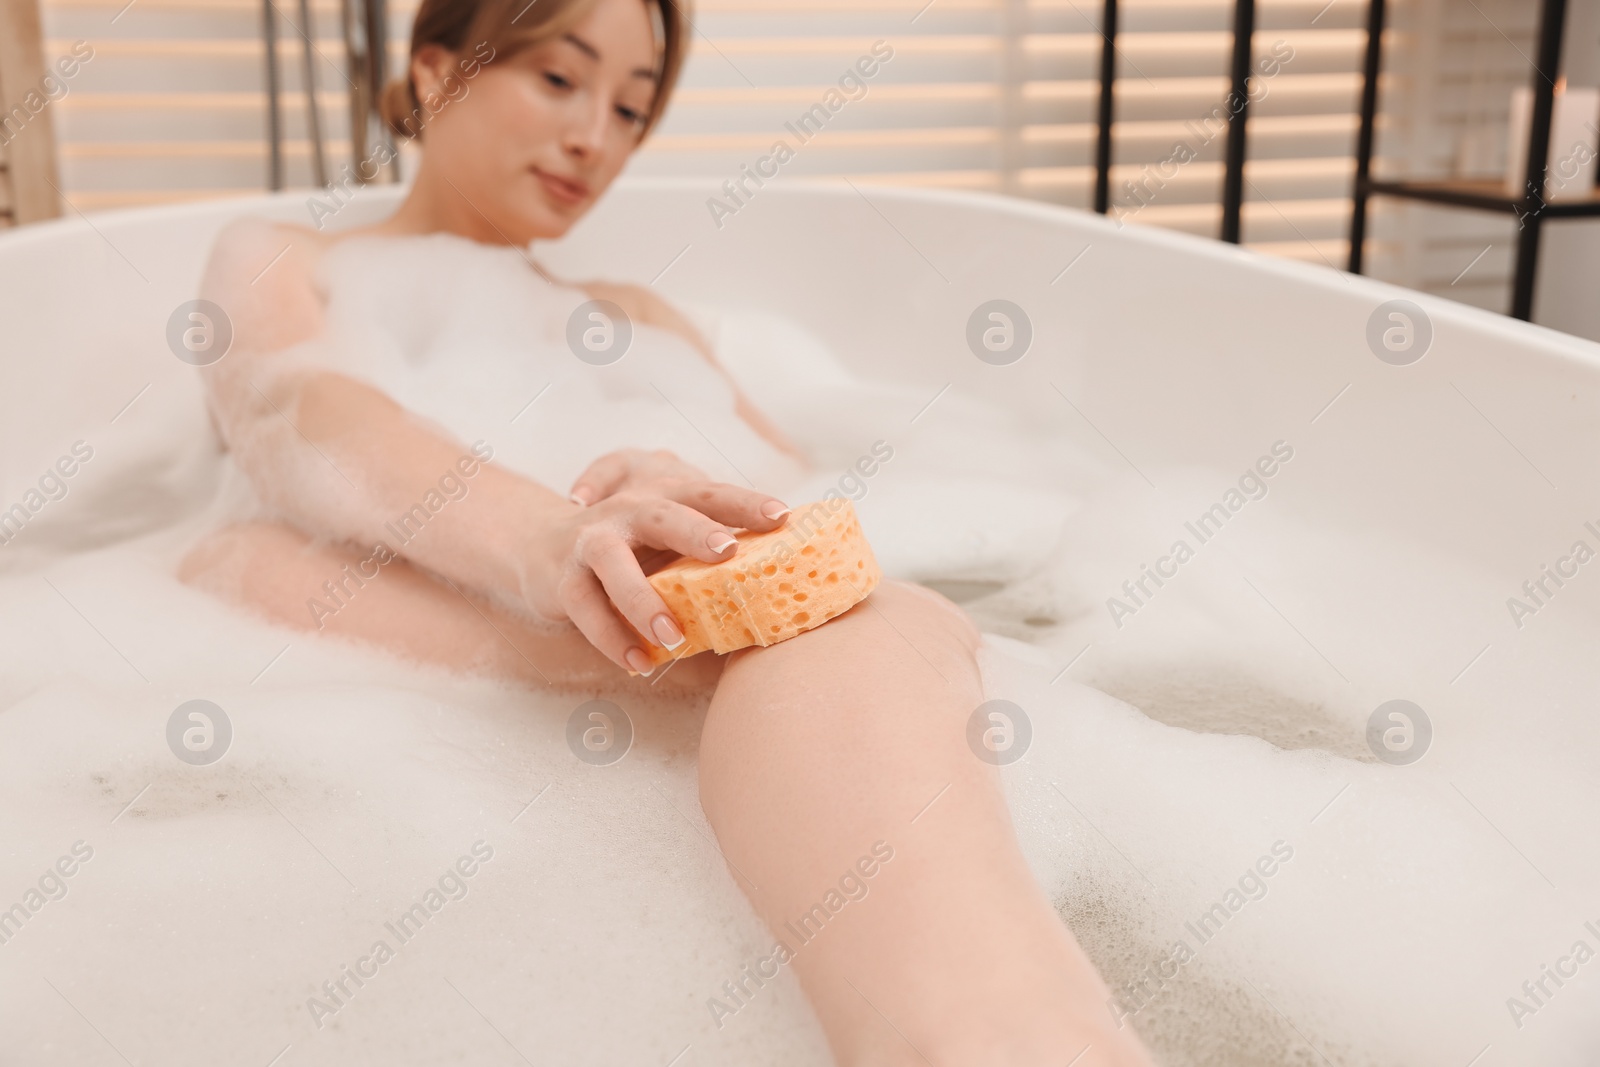 Photo of Woman taking bath with foam in tub indoors, selective focus